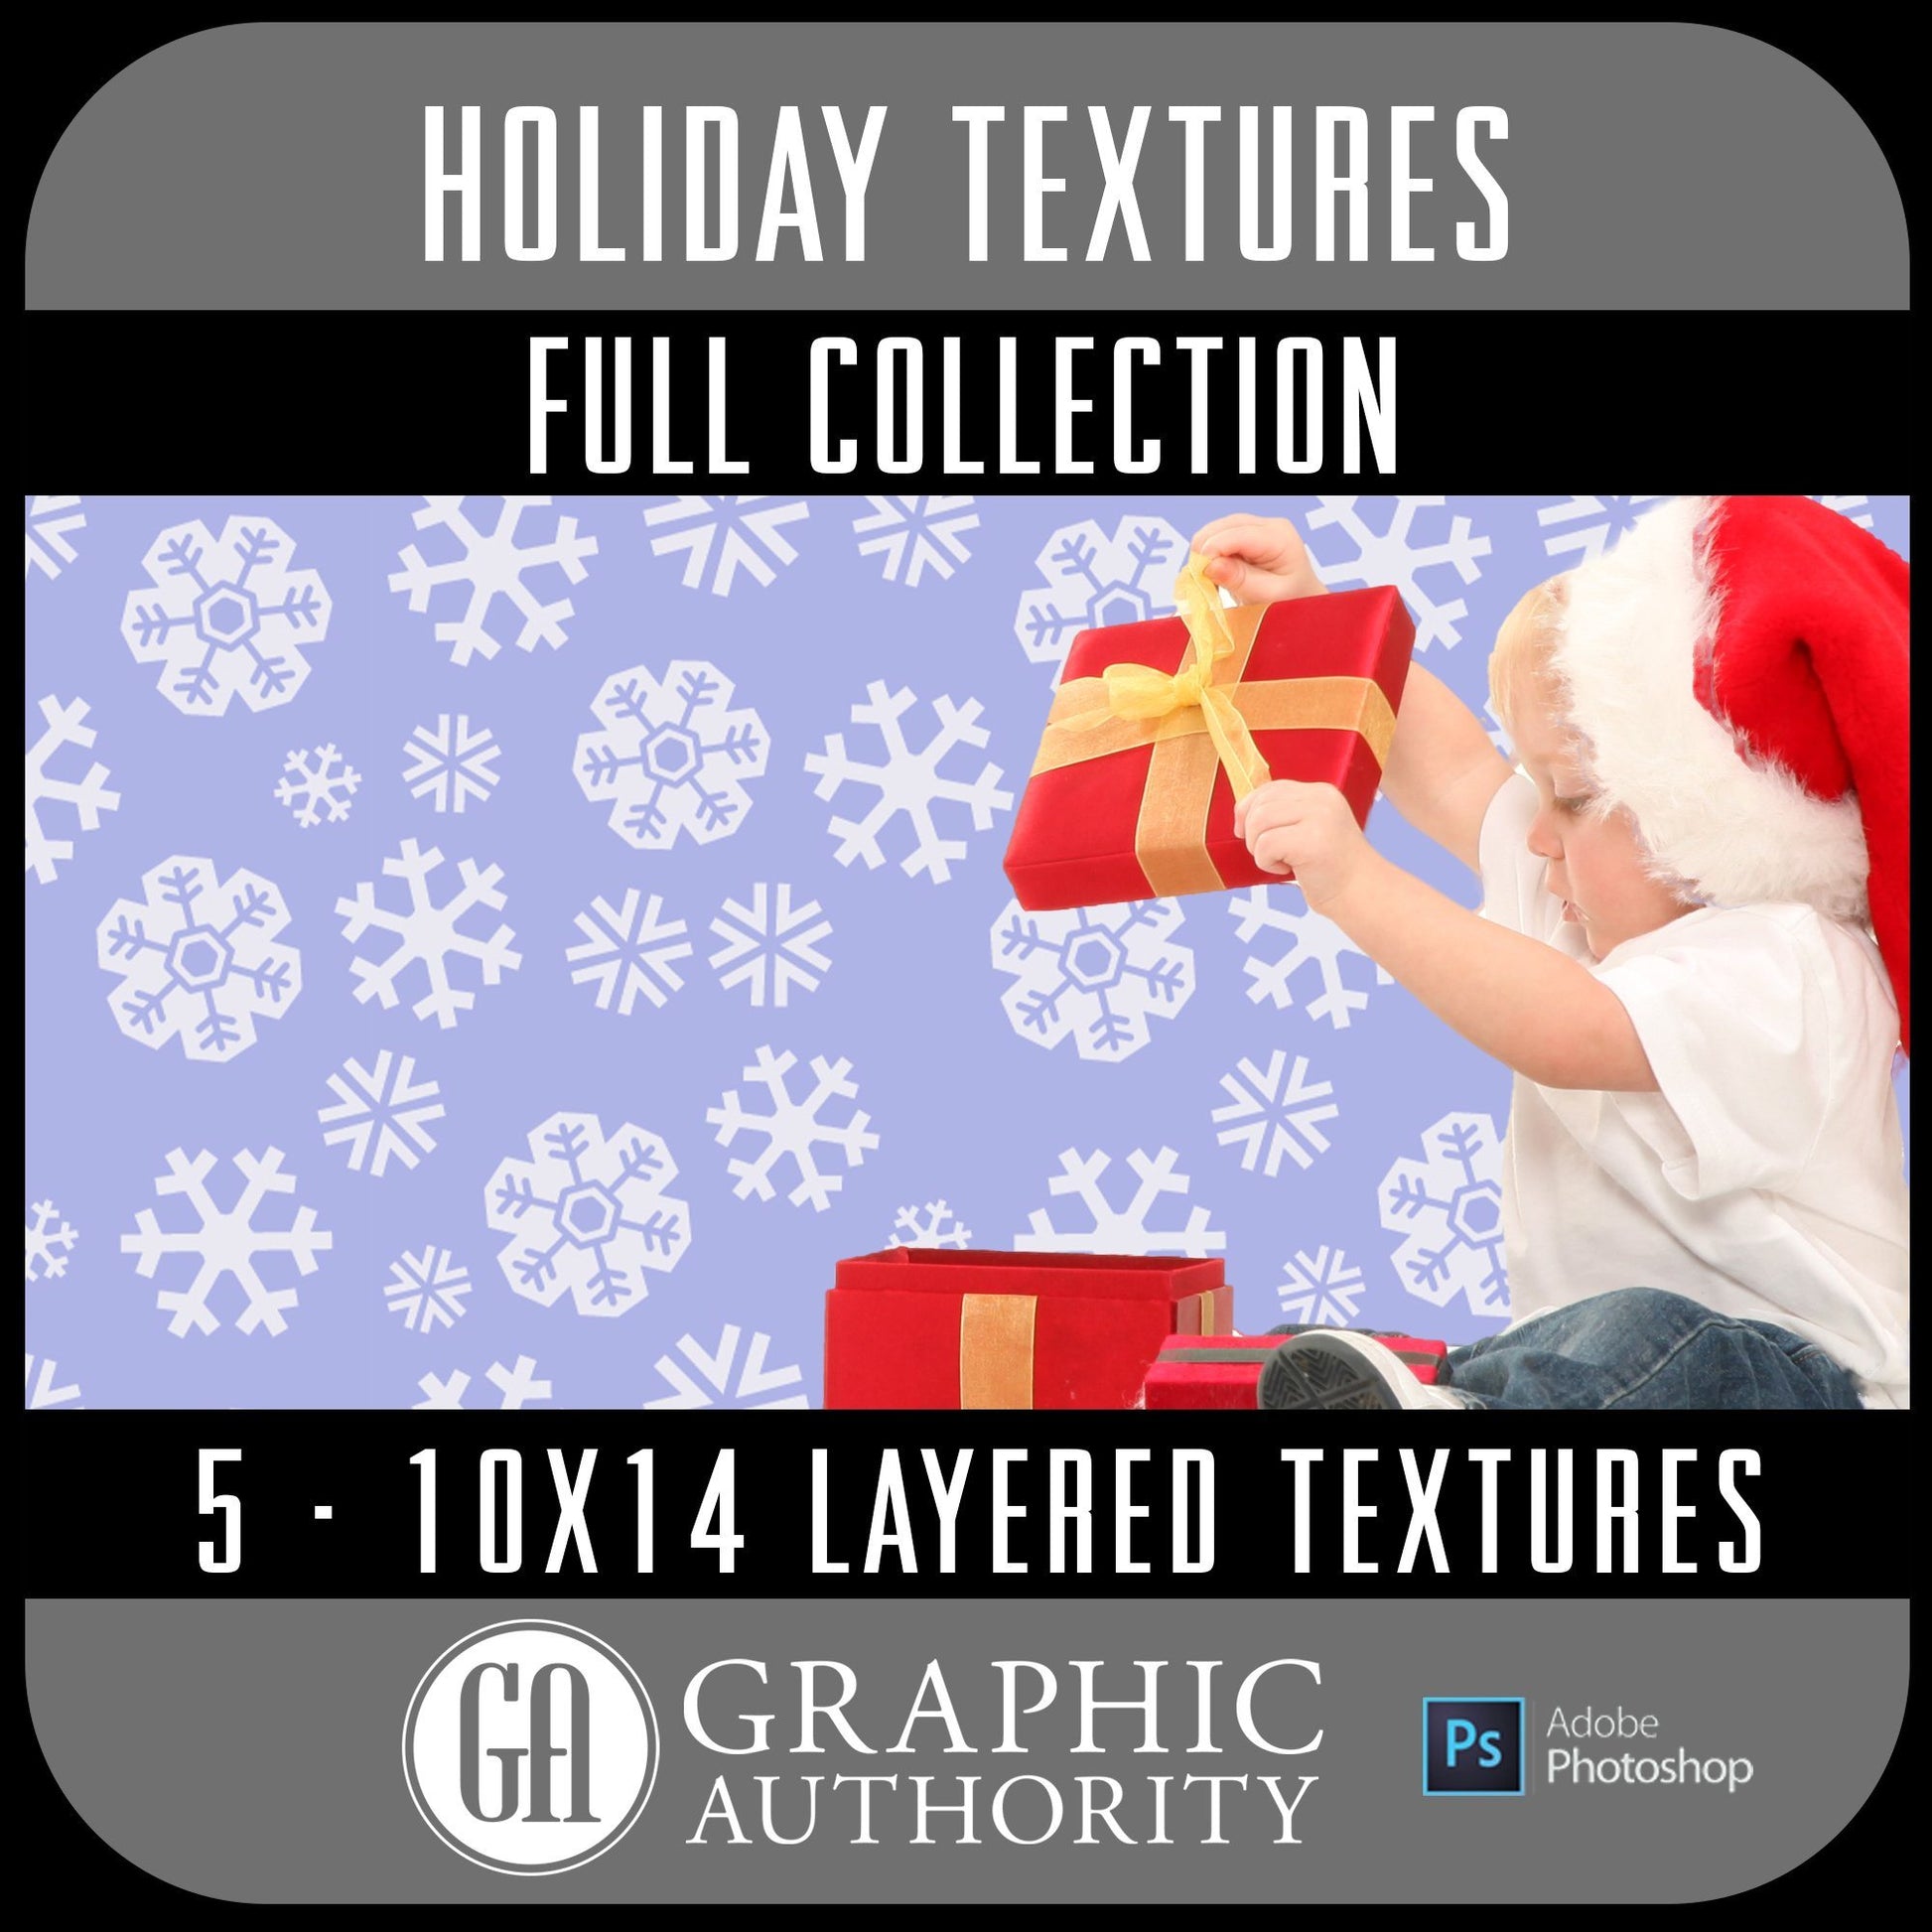 Holiday - 10x14 Layered Textures - Full Collection-Photoshop Template - Graphic Authority